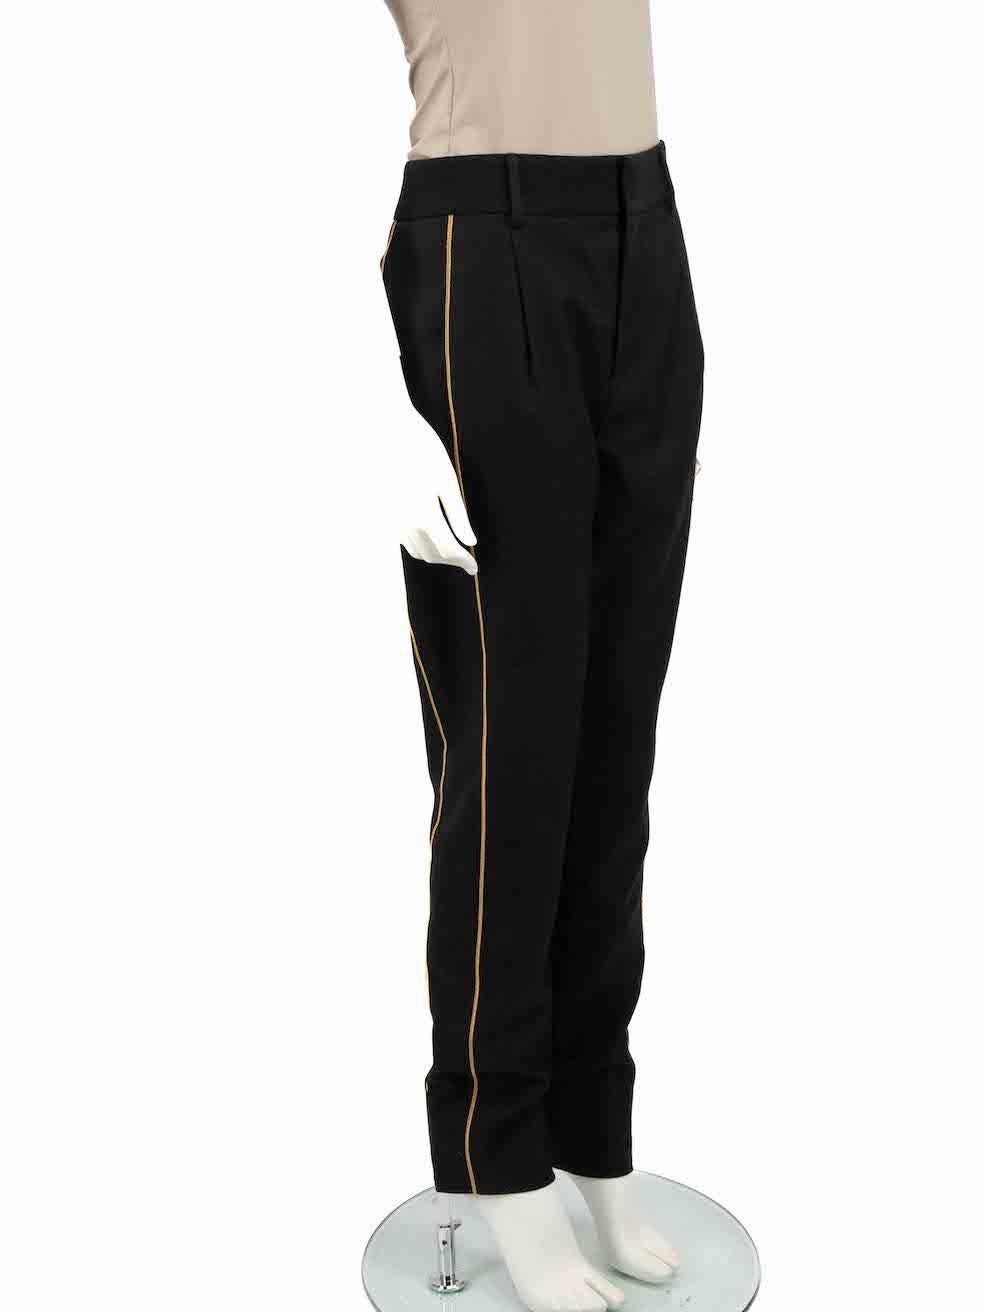 CONDITION is Very good. Hardly any visible wear to trousers is evident. However, the brand label is missing on this used Saint Laurent designer resale item.
 
 
 
 Details
 
 
 Black
 
 Wool
 
 Straight leg trousers
 
 Mid rise
 
 Gold metallic trim